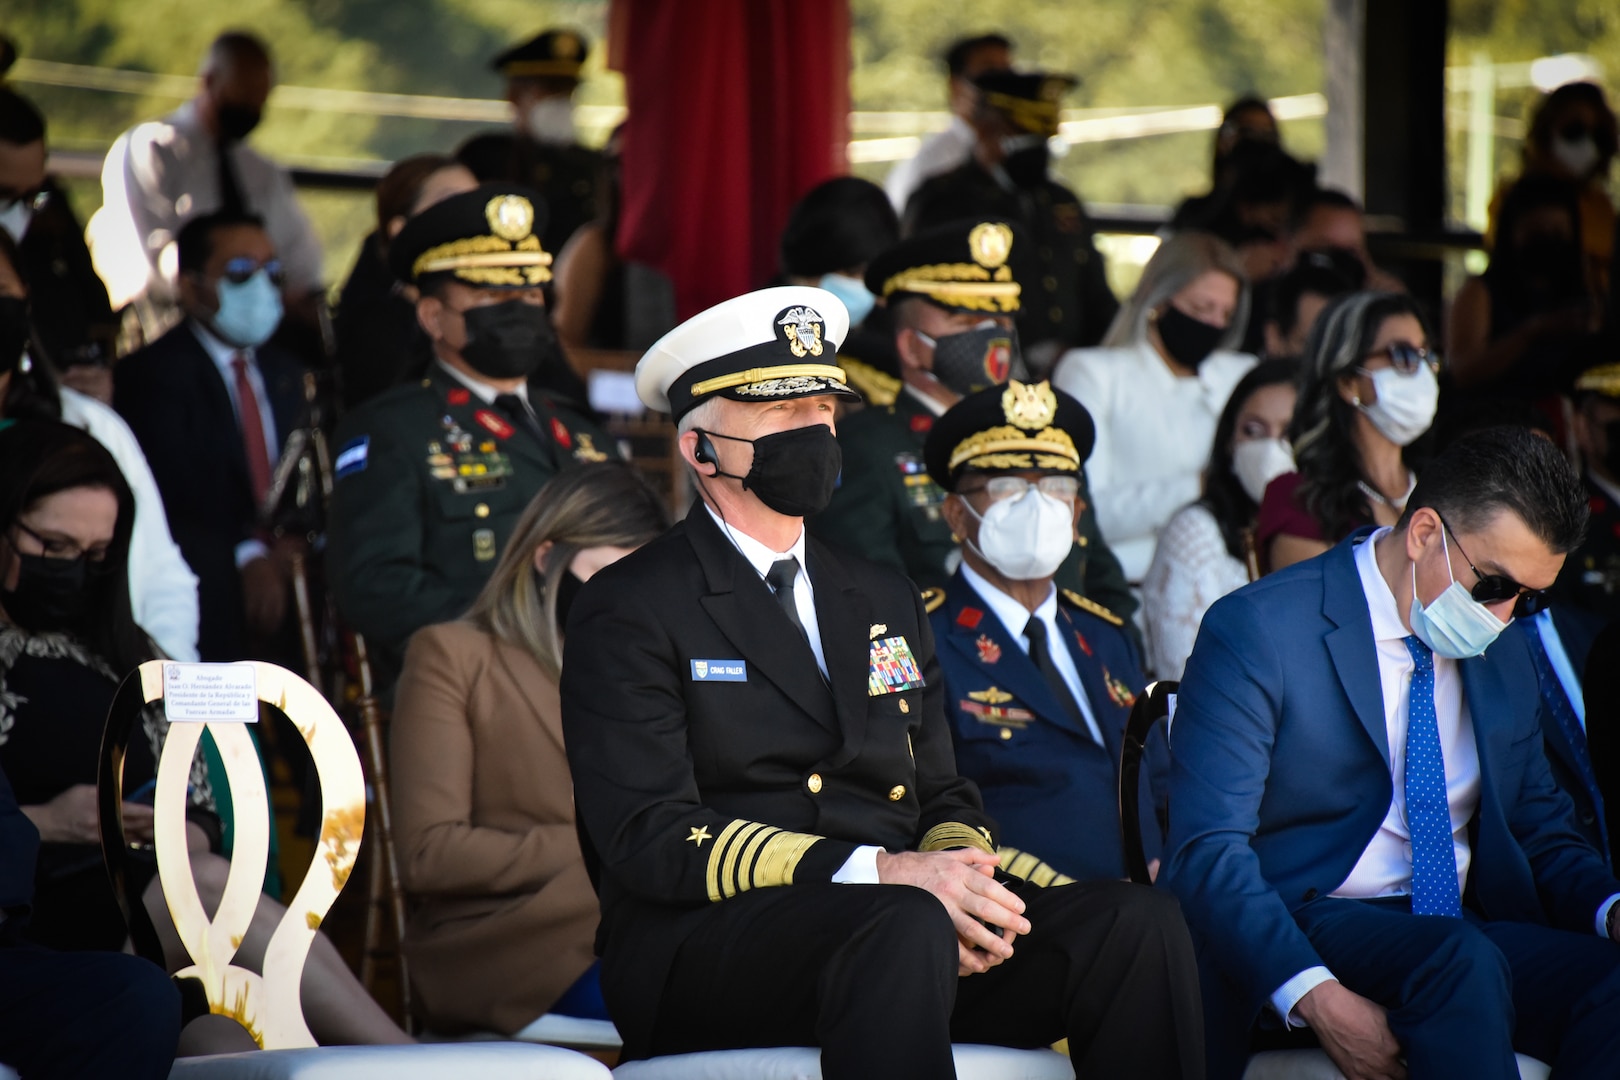 y Adm. Craig Faller, U.S. Southern Command commander, attended a military ceremony in Tegucigalpa, Dec. 11, 2020, hosted by the Honduran Armed Forces to celebrate the nation’s Army Day and the anniversary of the Honduran Army’s formation.